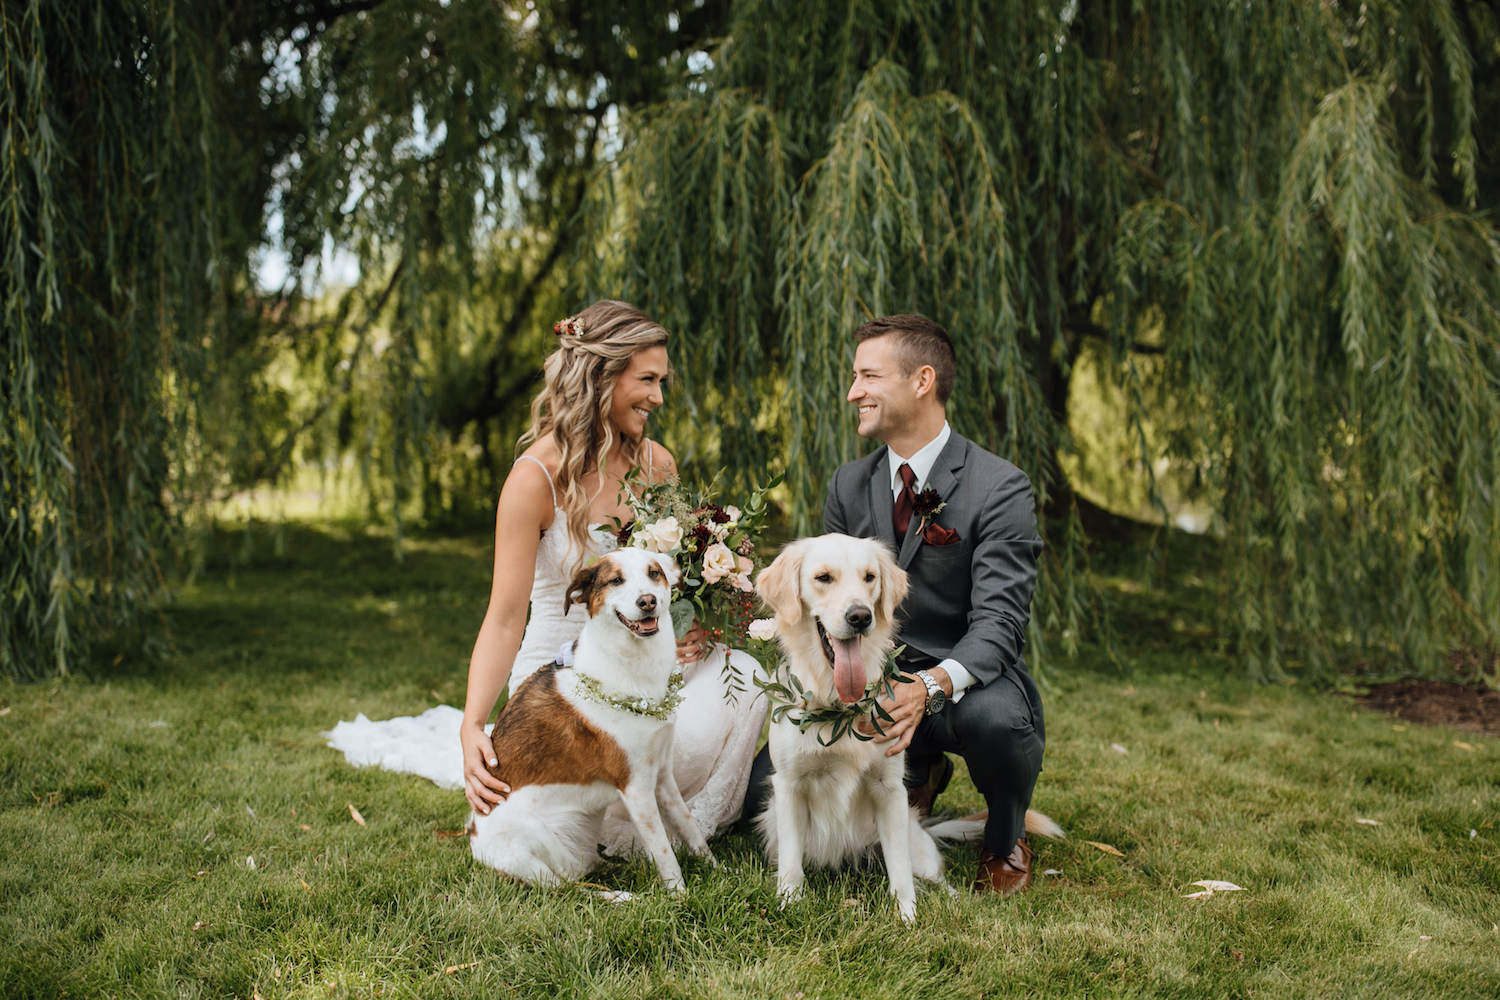 Bride and Groom smiling at each other with dogs